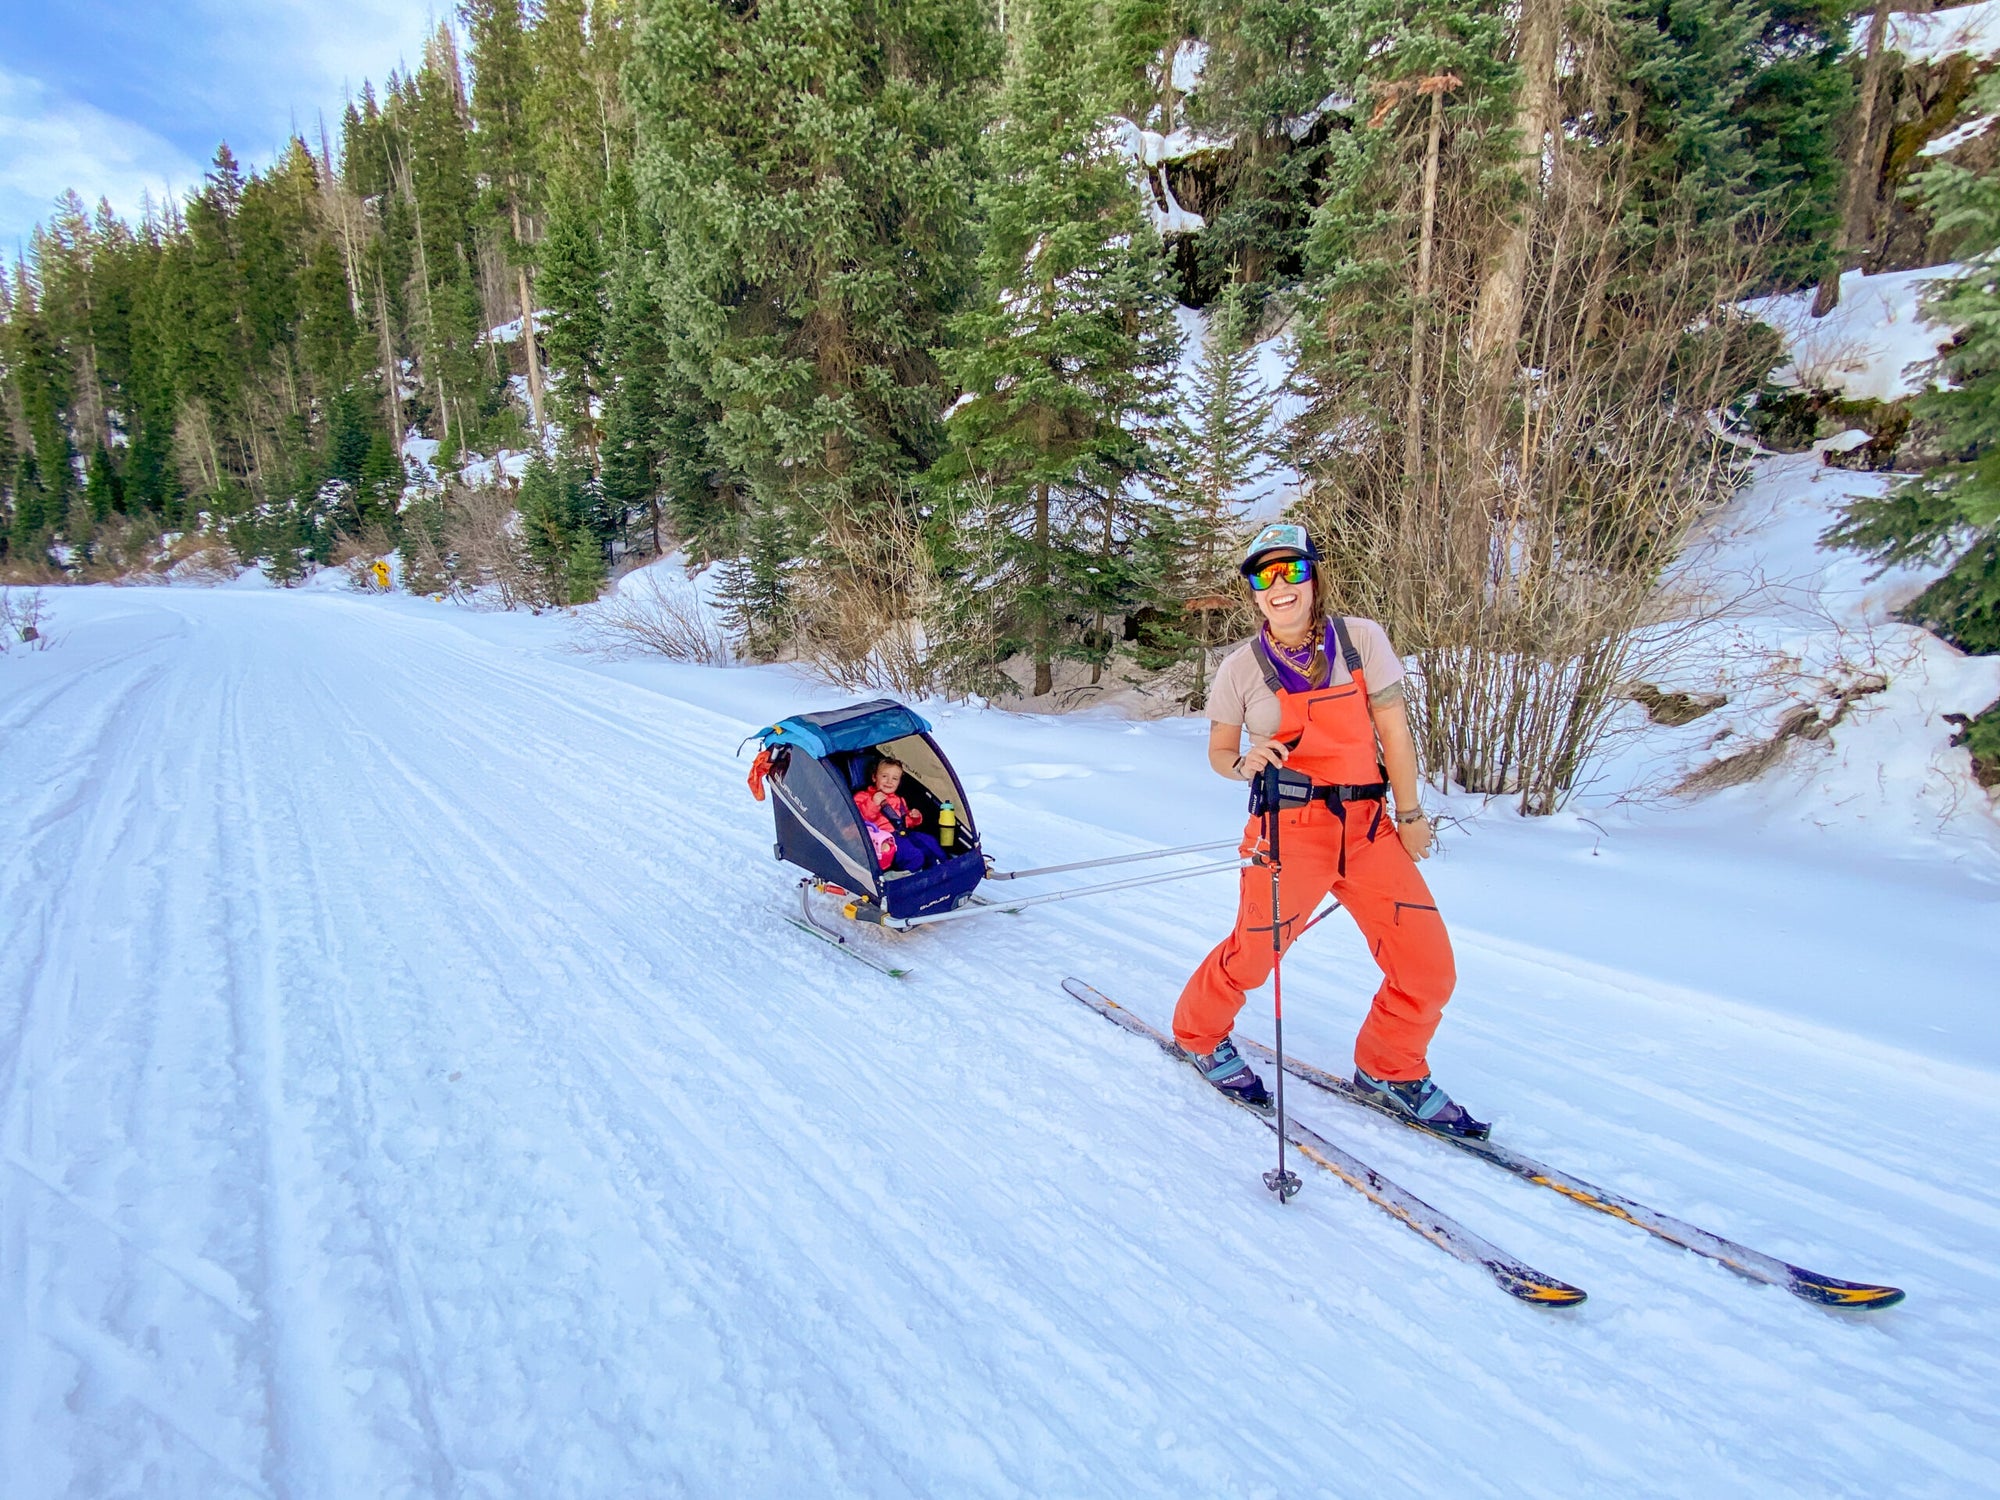 woman skiing with kids bike trailer converted to ski trailer attached around her waist